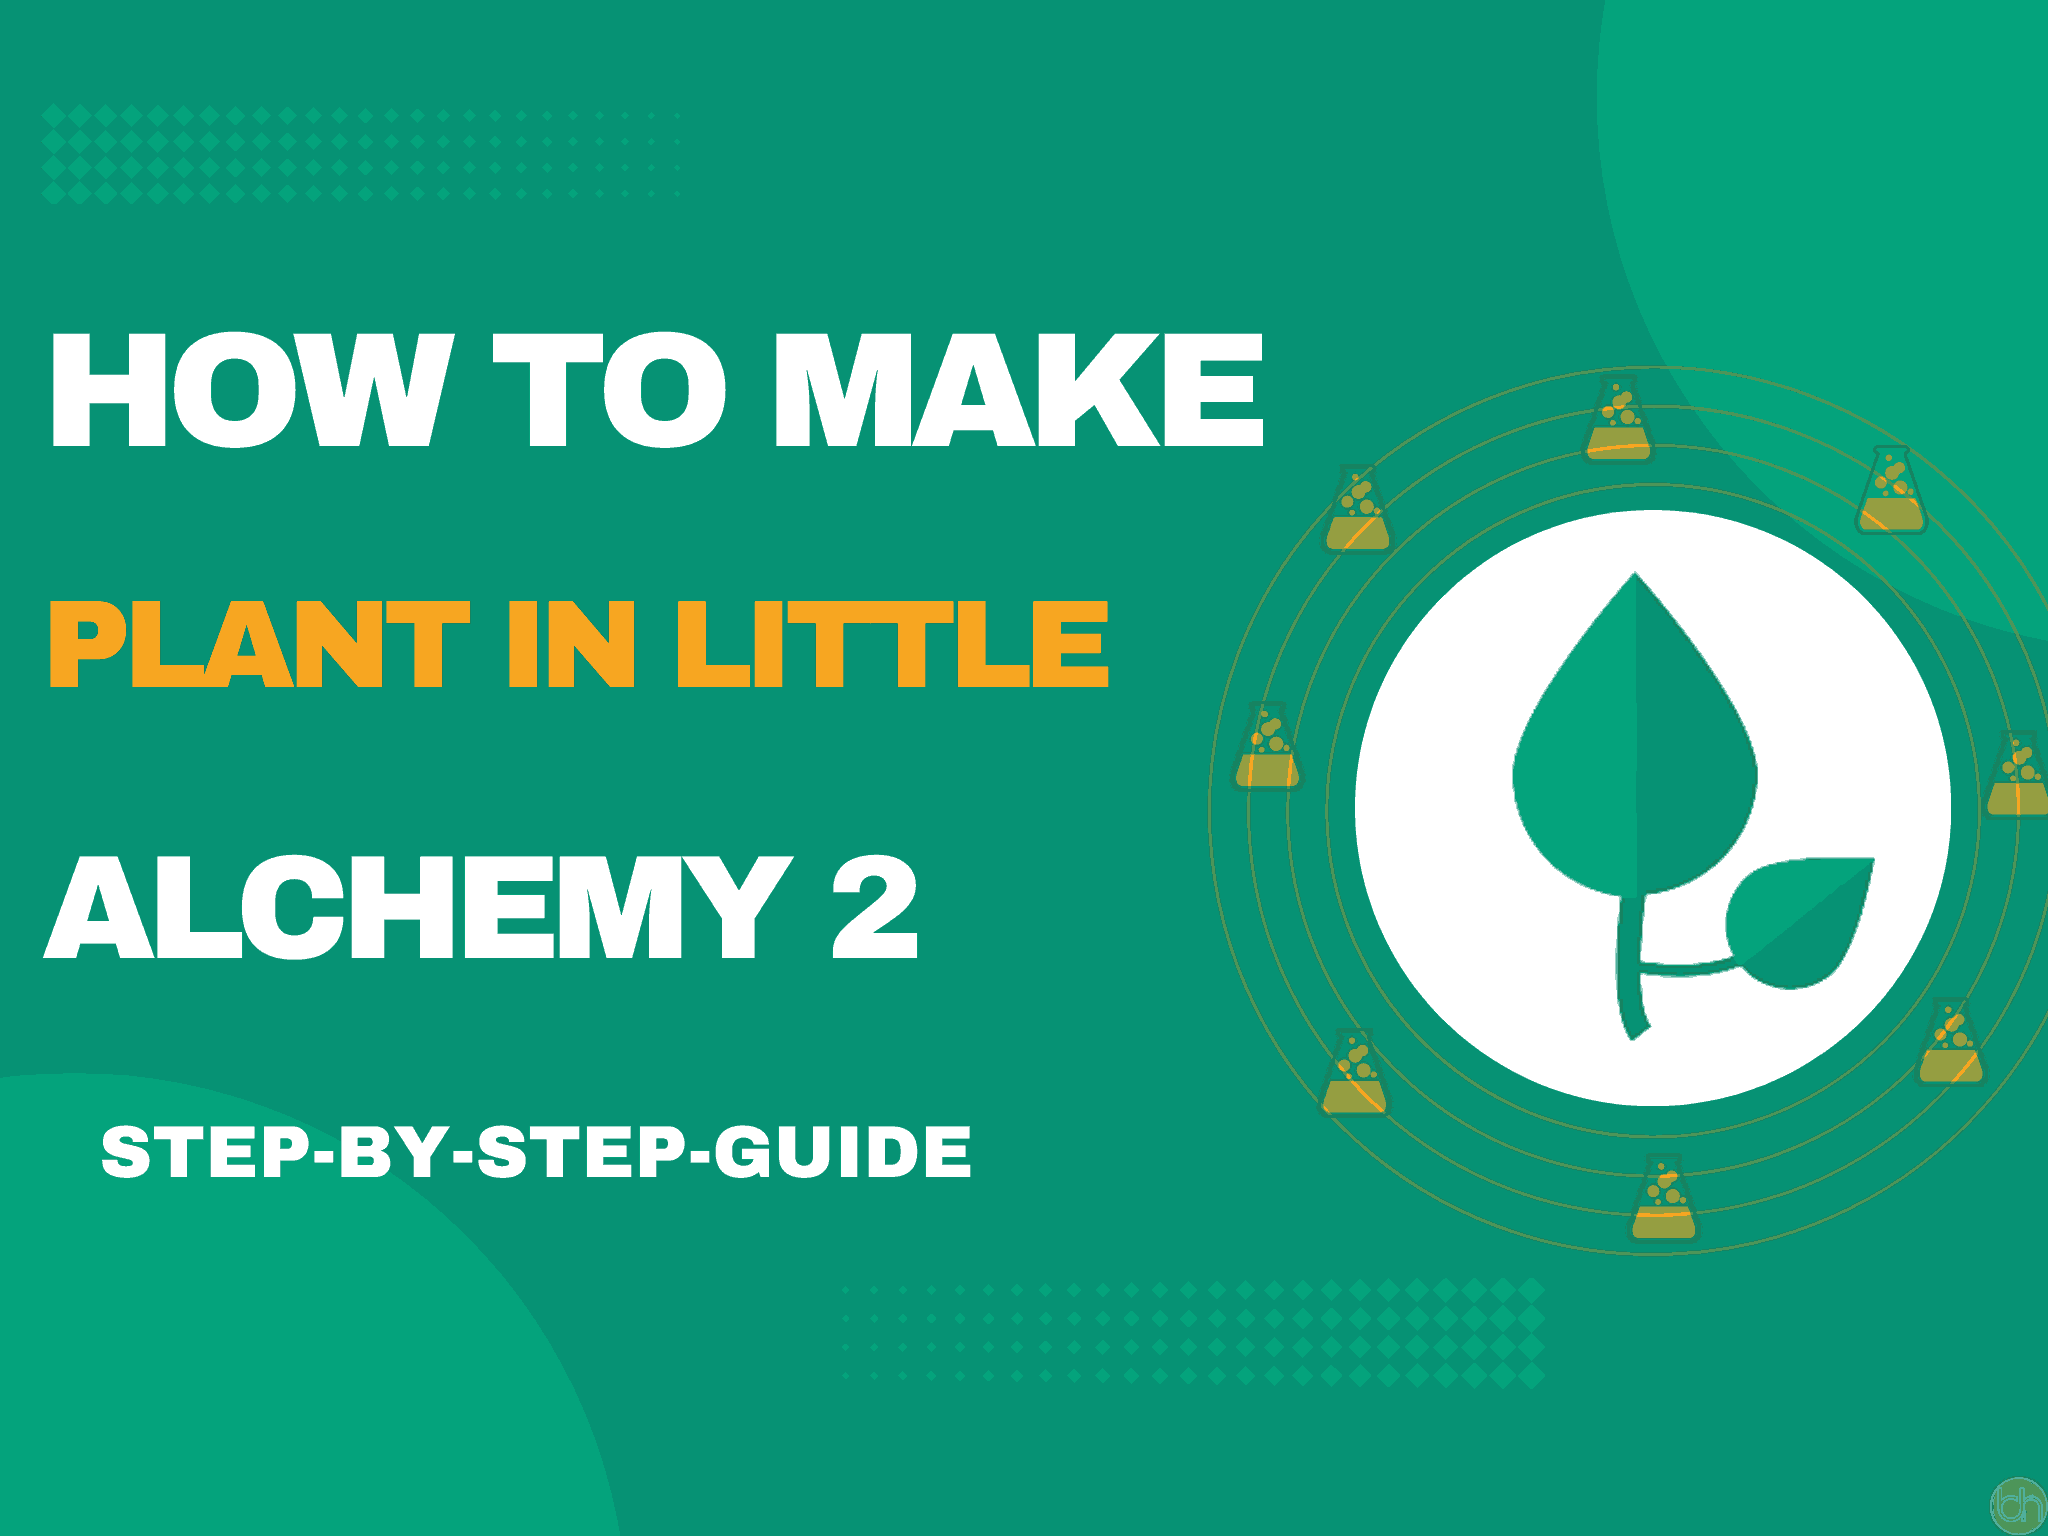 How to make Plant in little alchemy 2